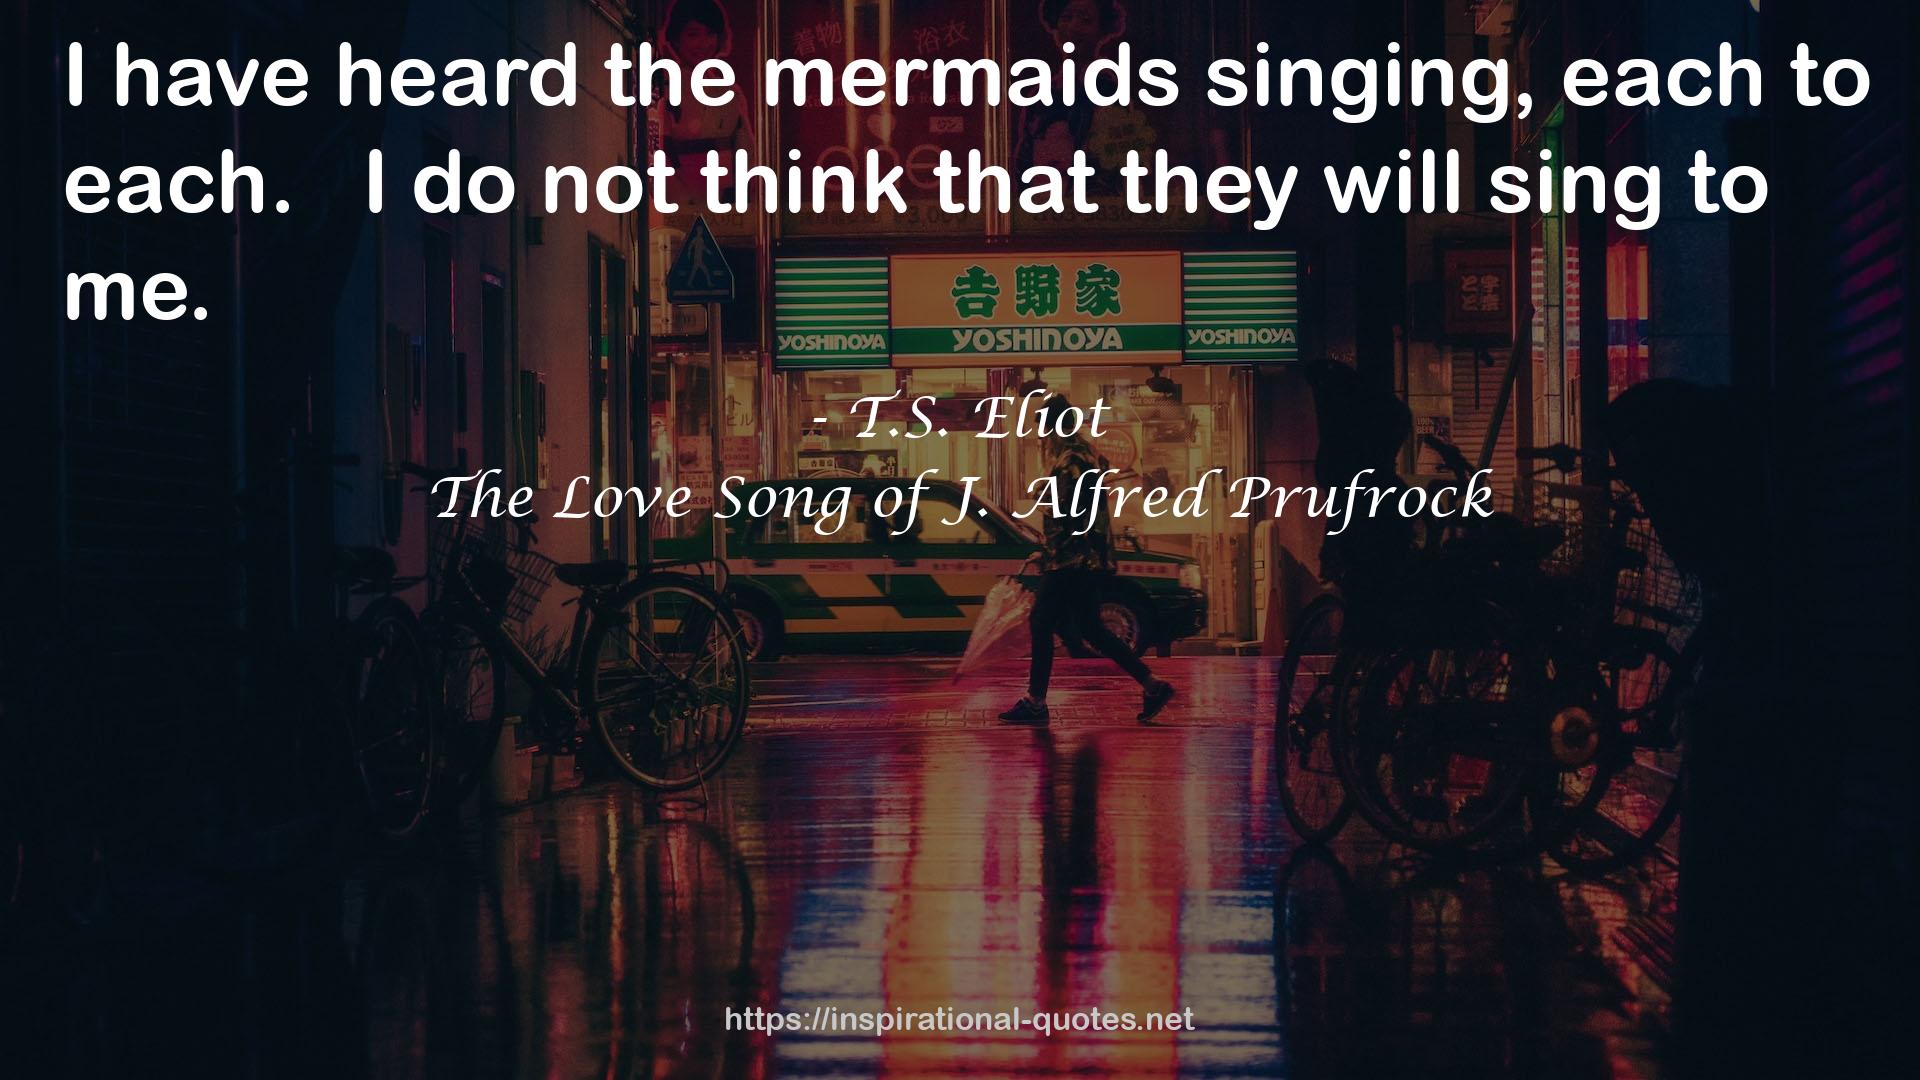 The Love Song of J. Alfred Prufrock QUOTES